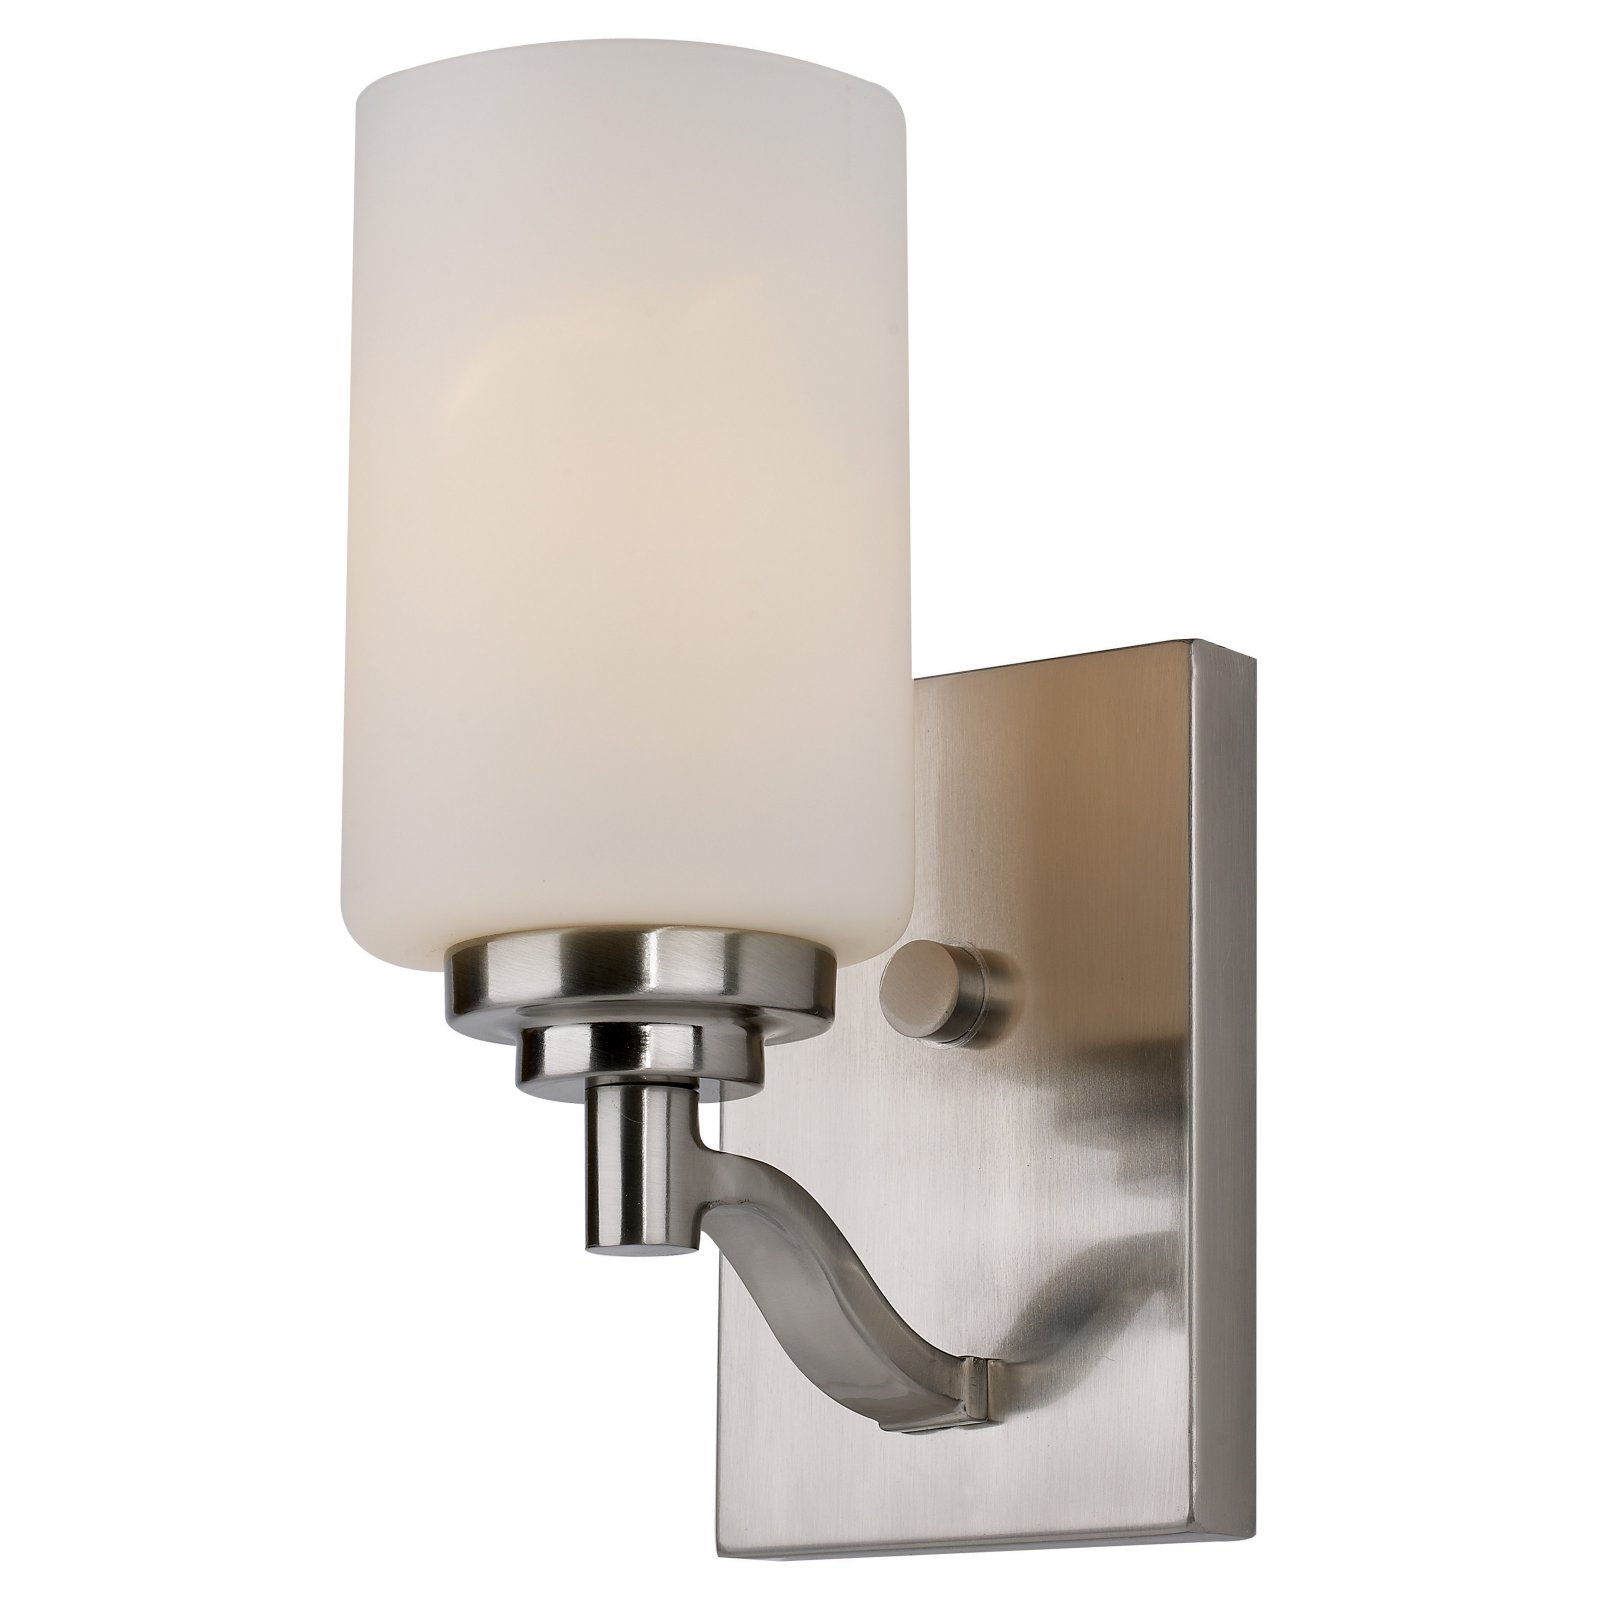 70521 BN-Trans Globe Lighting-Mod Space - One Light Wall Sconce-Brushed Nickel Finish - image 1 of 2